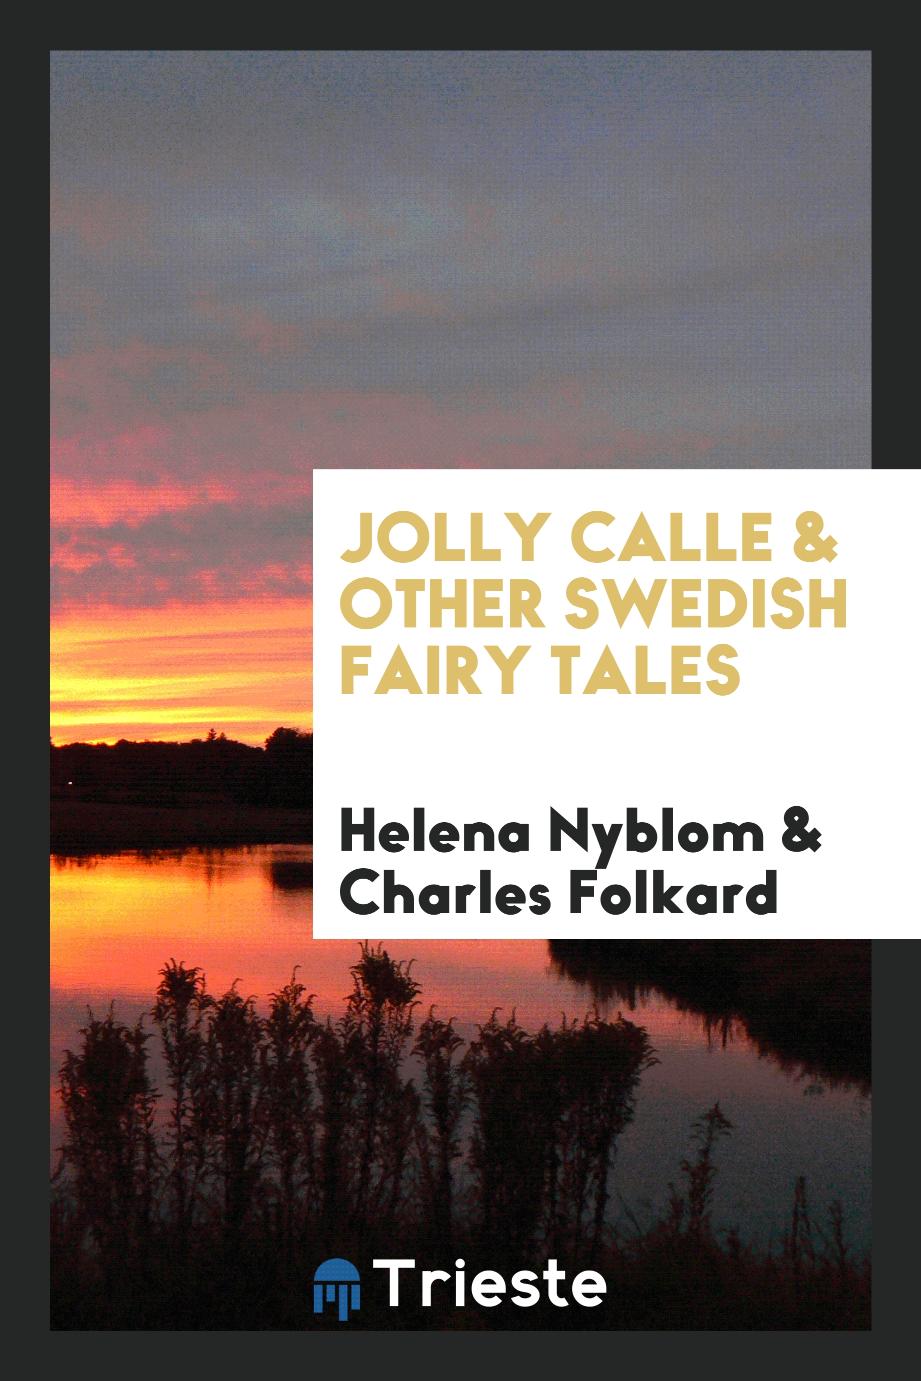 Jolly Calle & other Swedish fairy tales